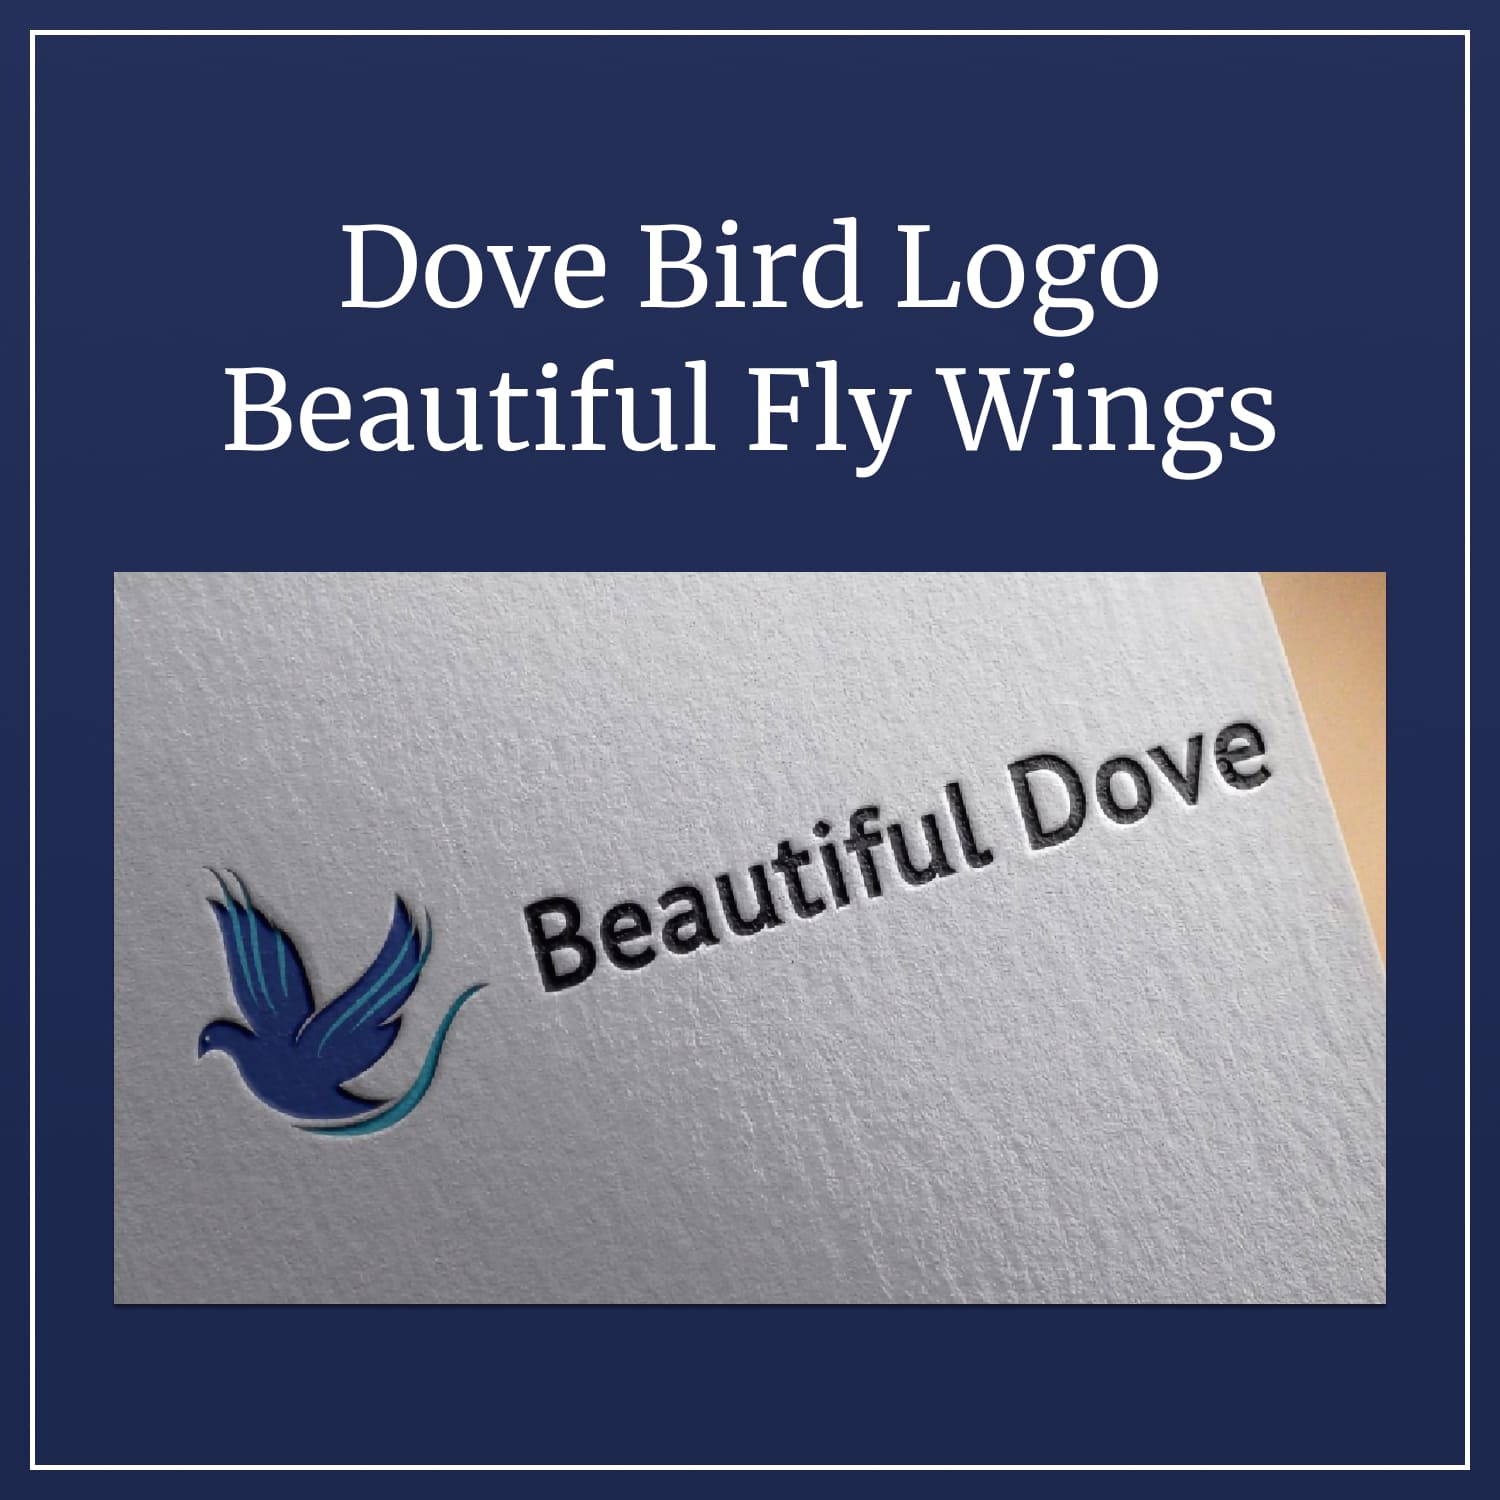 Dove Bird Logo Beautiful Fly Wings Template cover image.